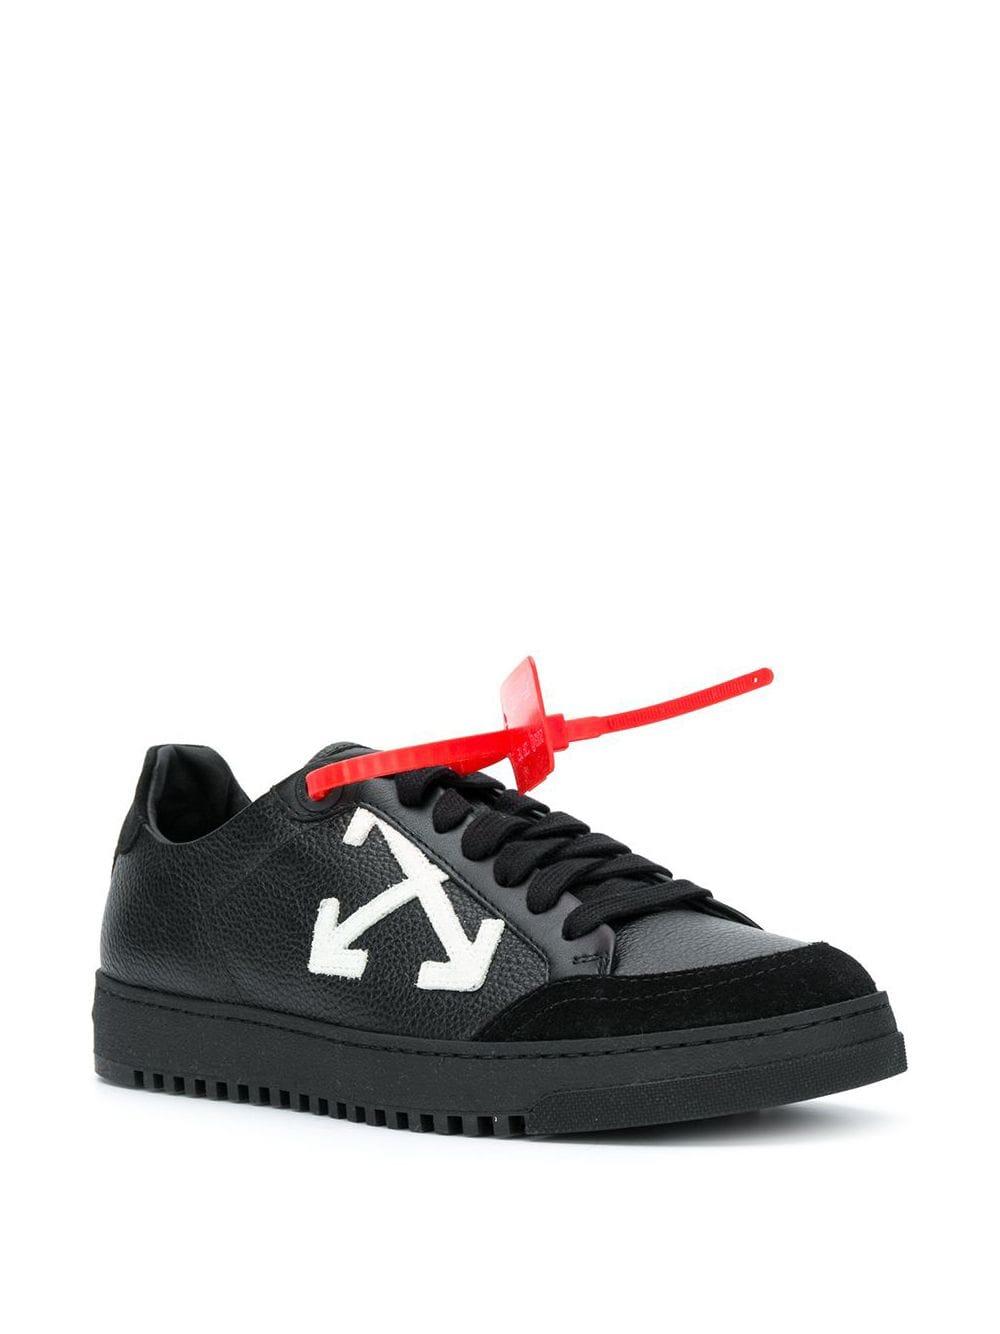 Off-White Virgil Abloh Red Tag Trainers in Black | Lyst